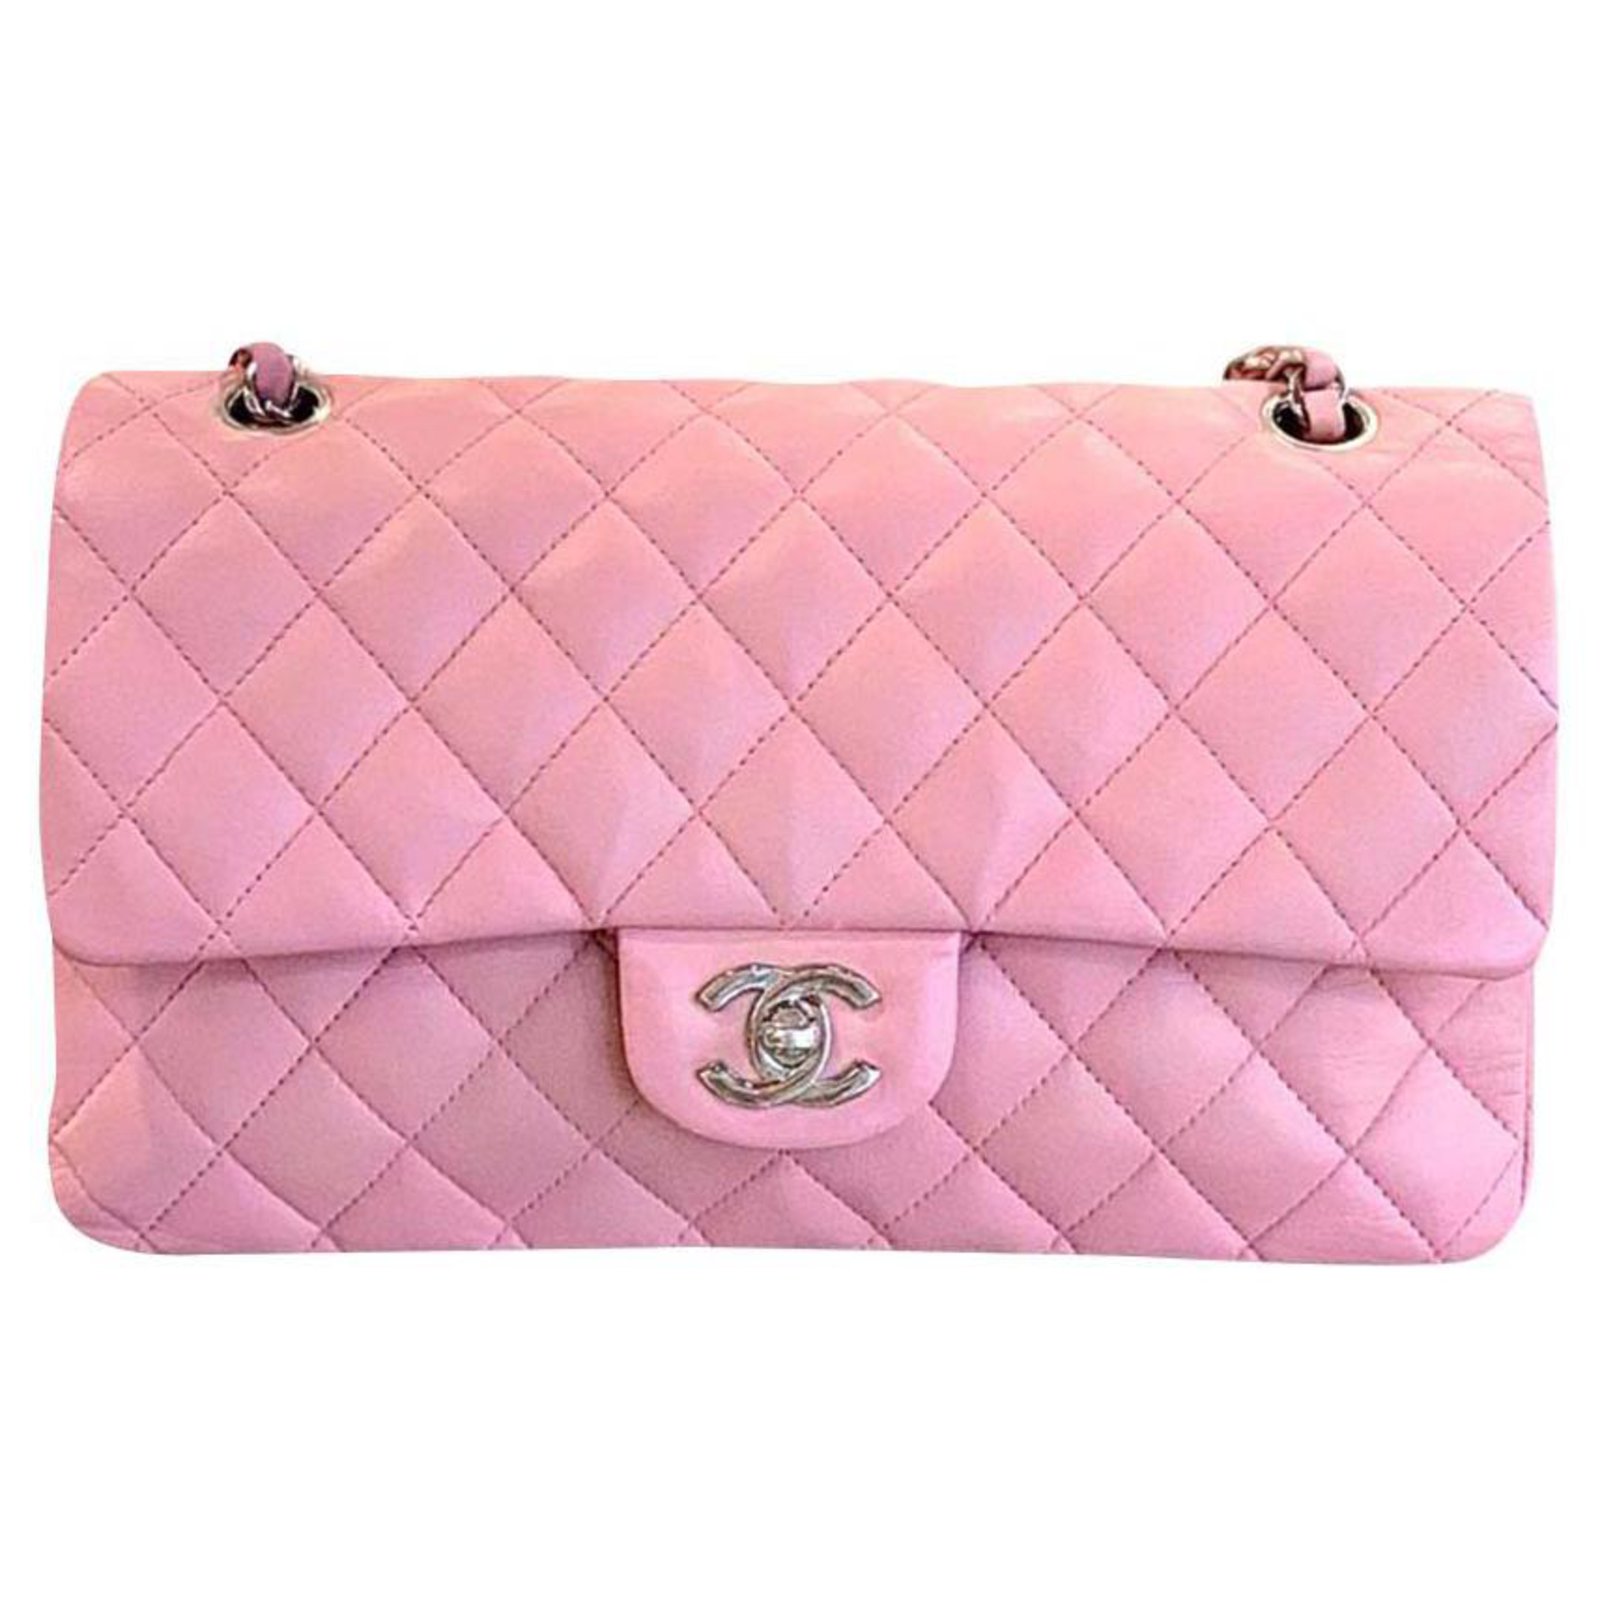 Heritage Vintage Chanel Pink Fabric Classic Single Flap Bag with  Lot  77006  Heritage Auctions